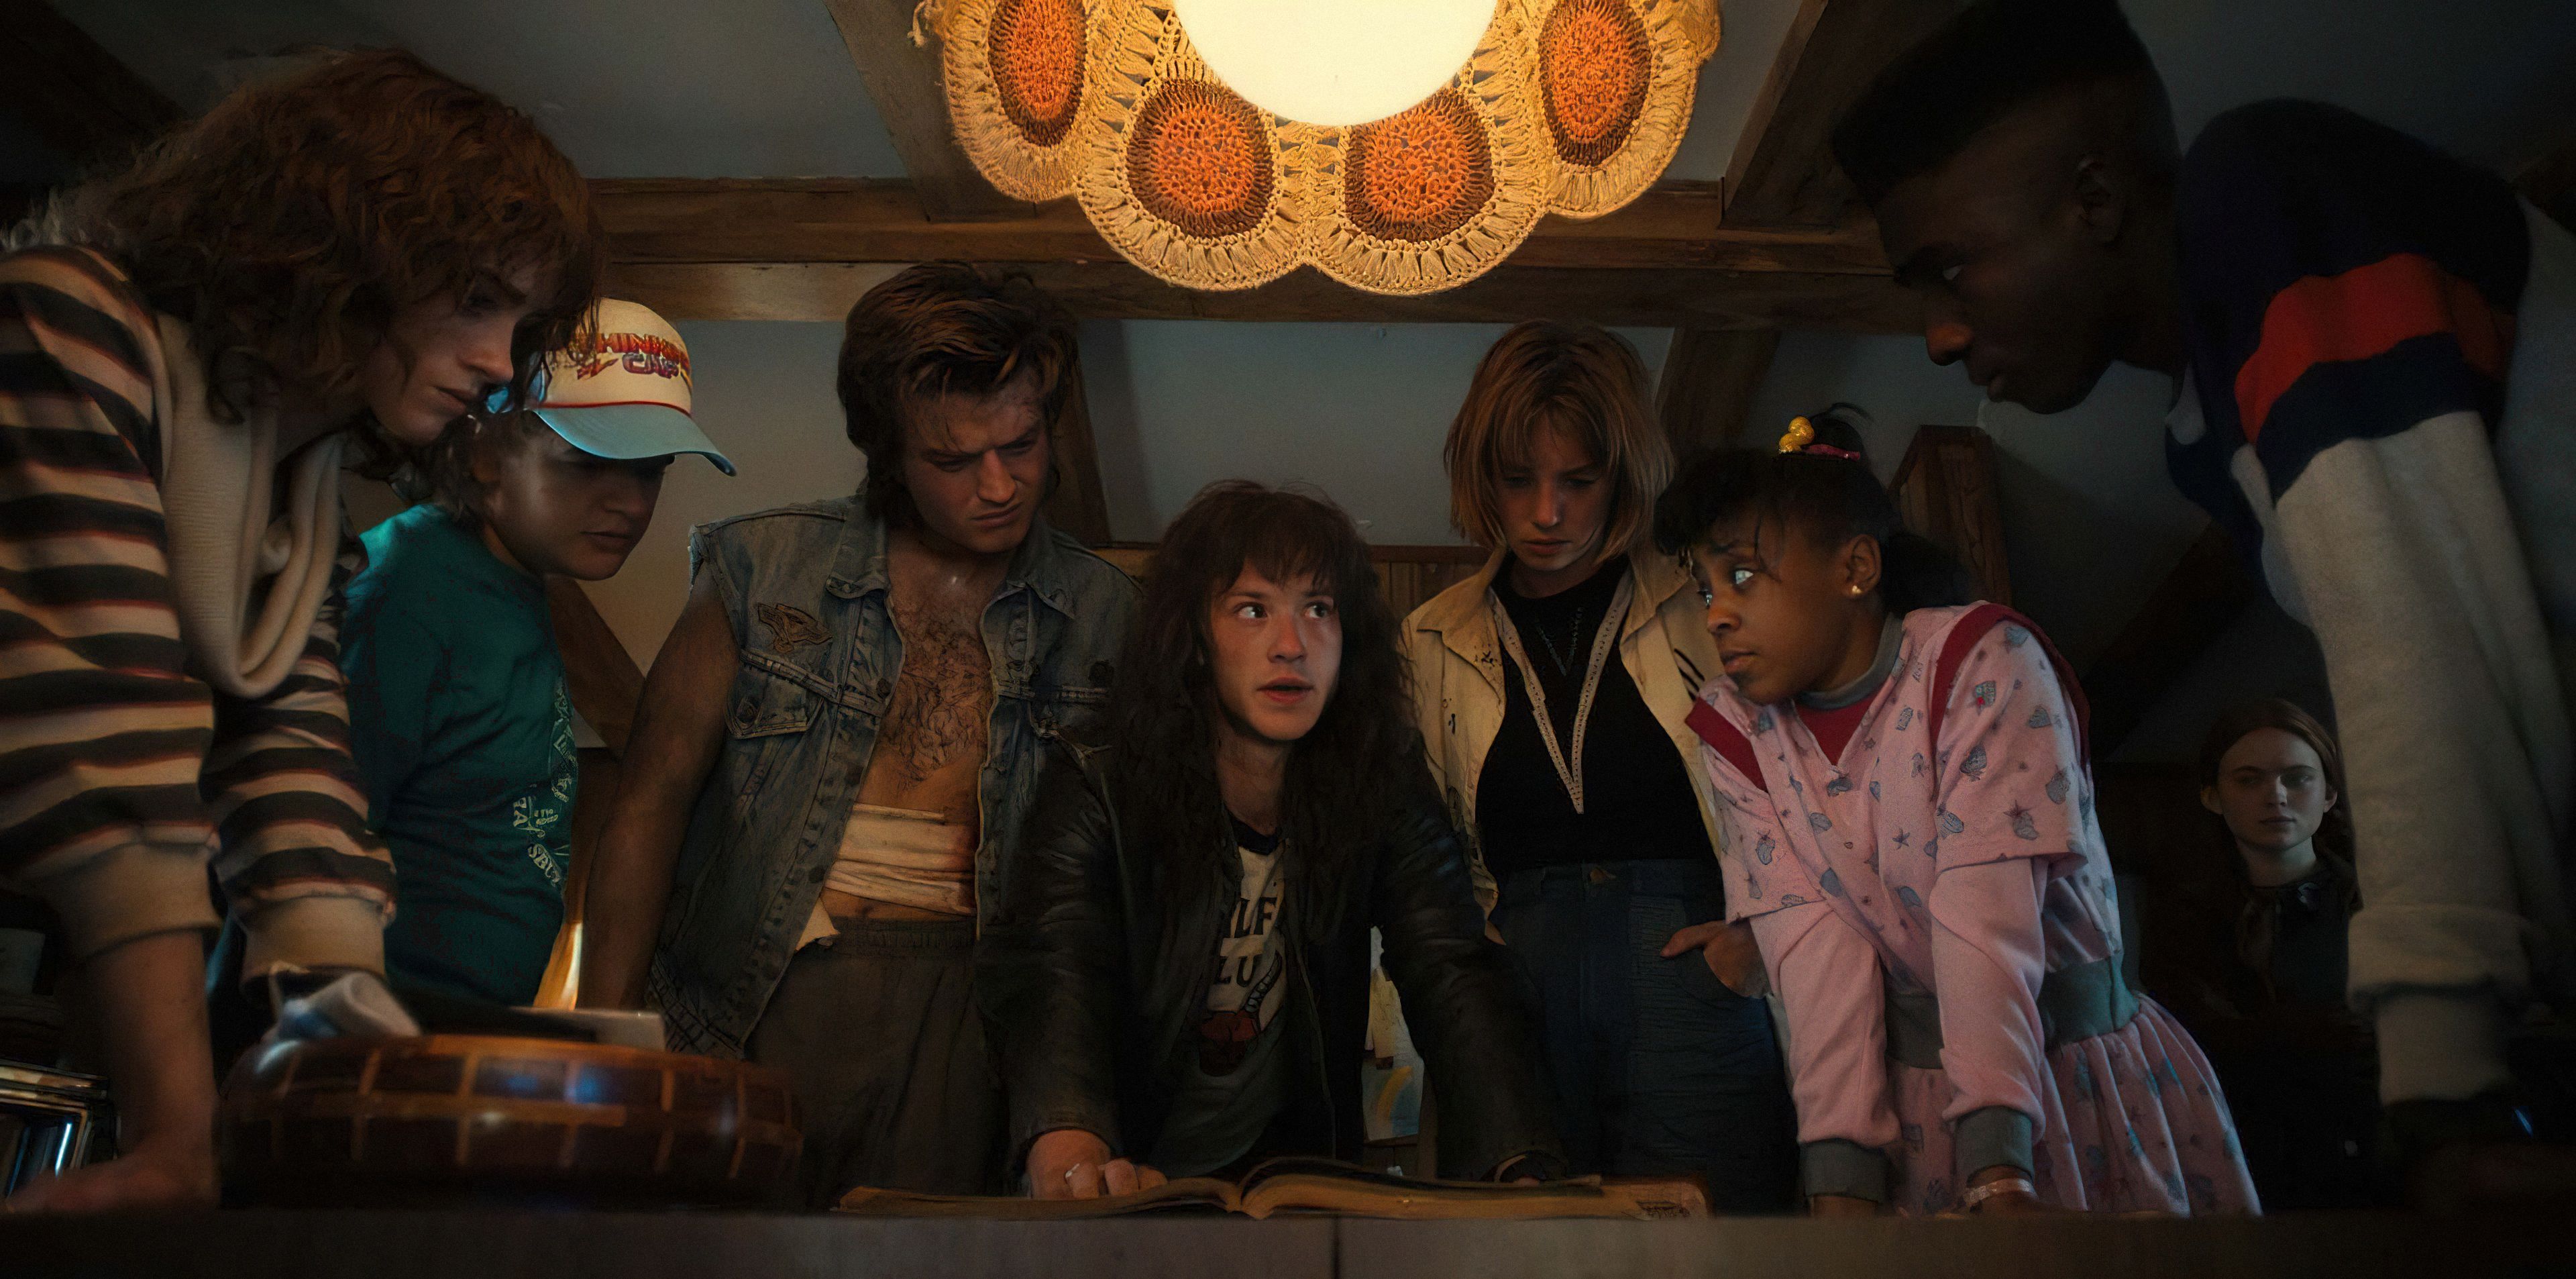 8 Stranger Things Characters Who Stole The Show Despite Appearing Briefly